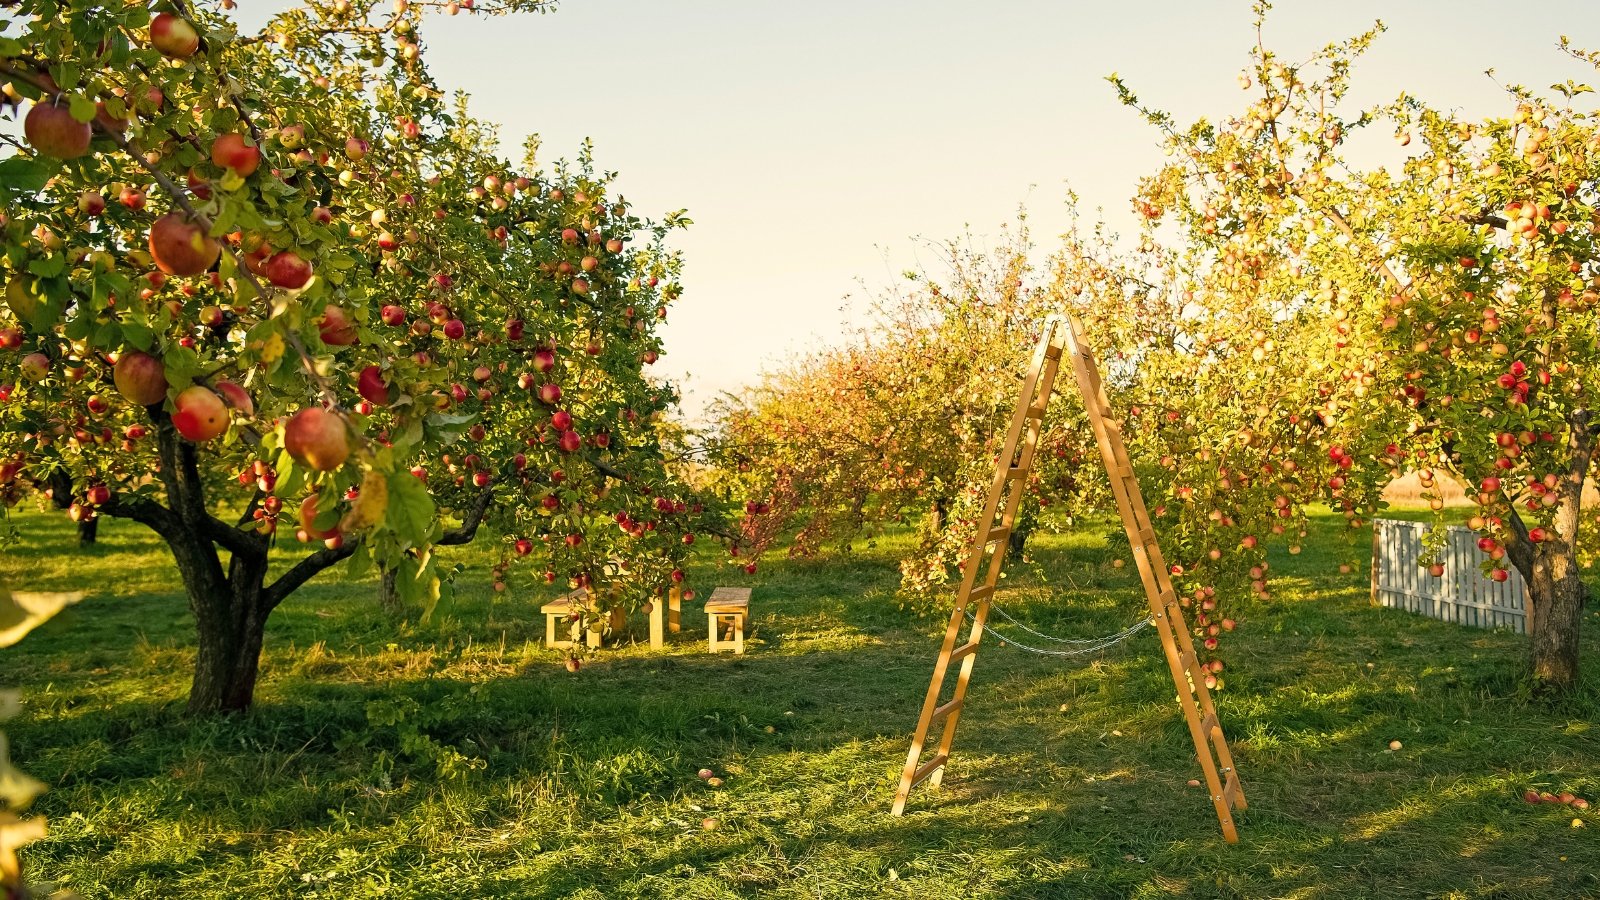 The backyard apple orchard showcases rows of trees with gnarled branches, vibrant green leaves, and clusters of red and green apples, with a wooden ladder standing between the trees.